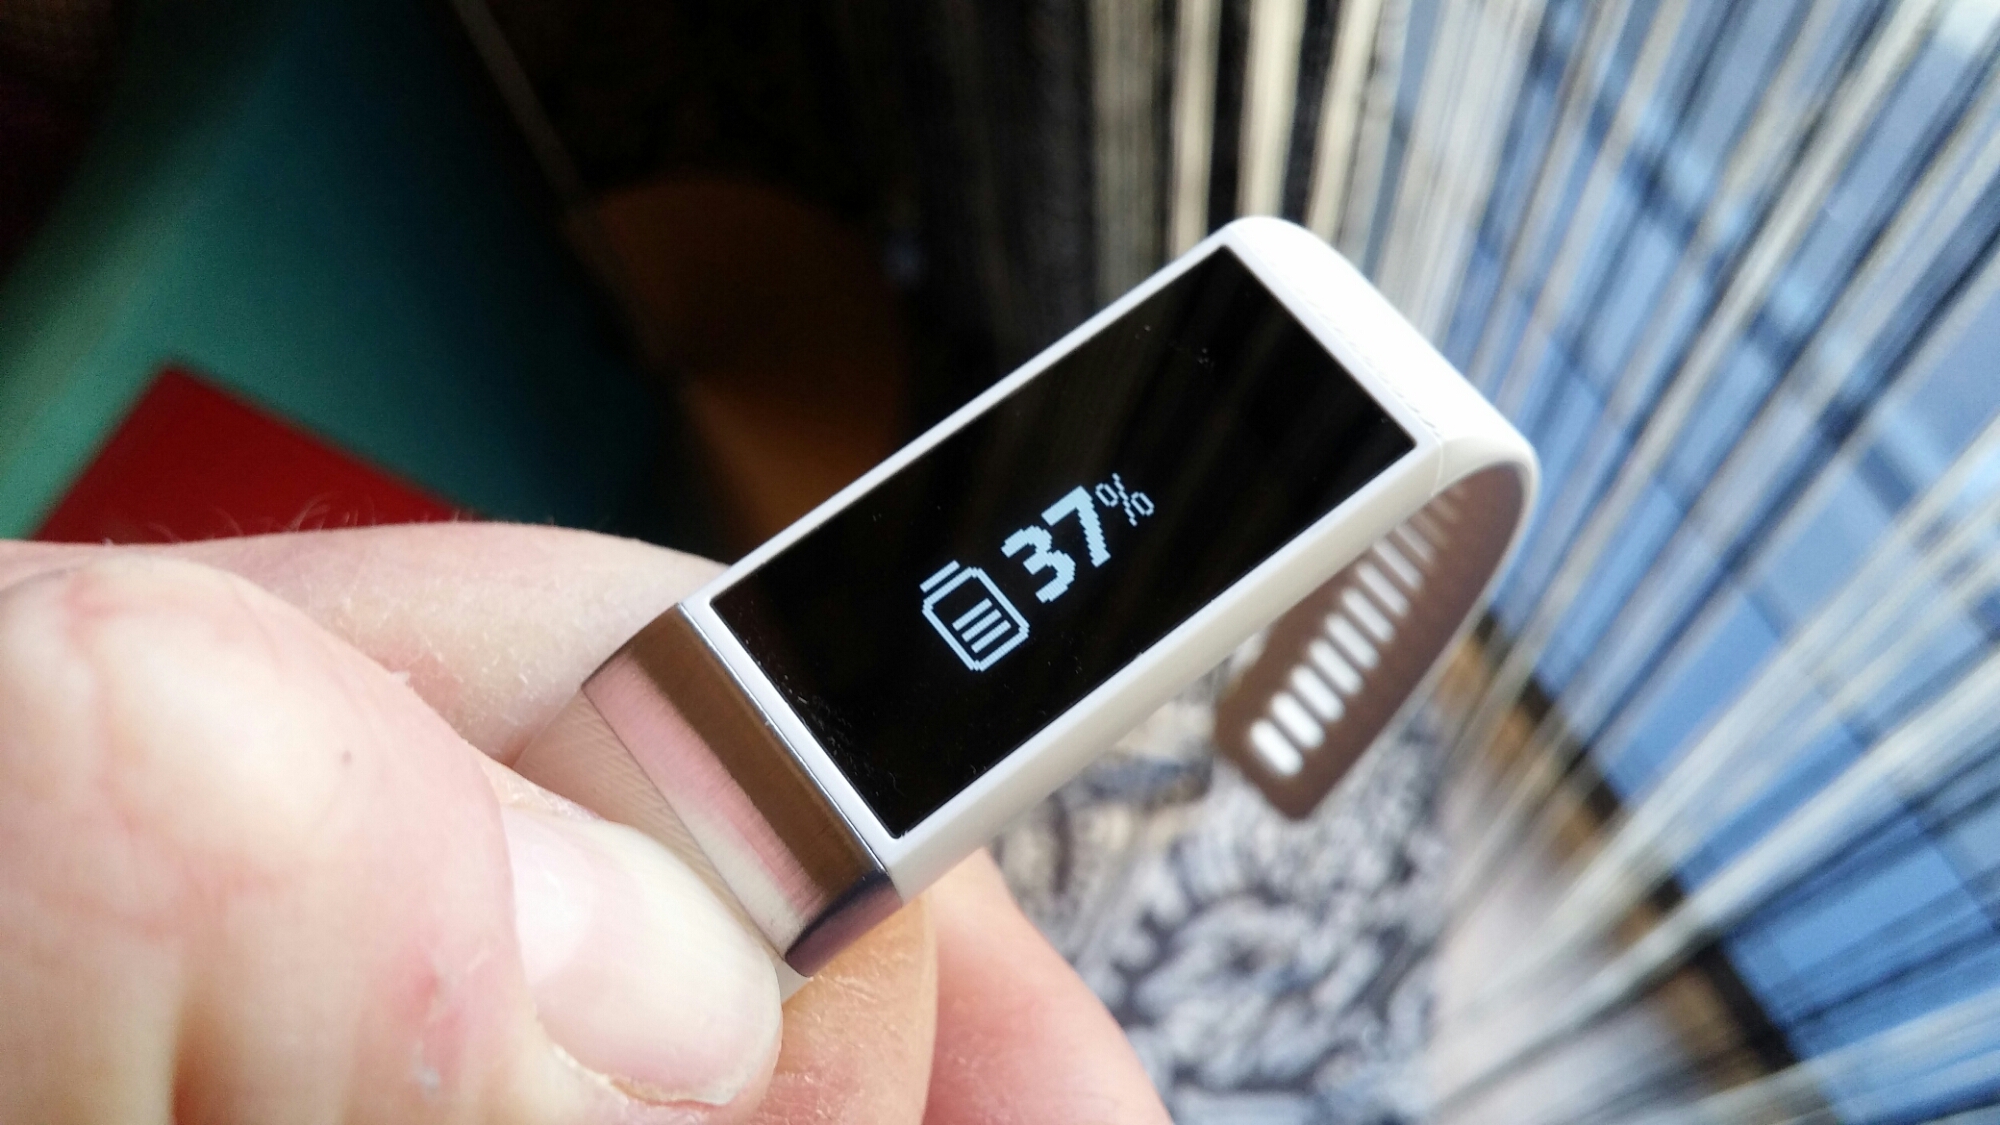 Acer Liquid Leap Smart Band in action